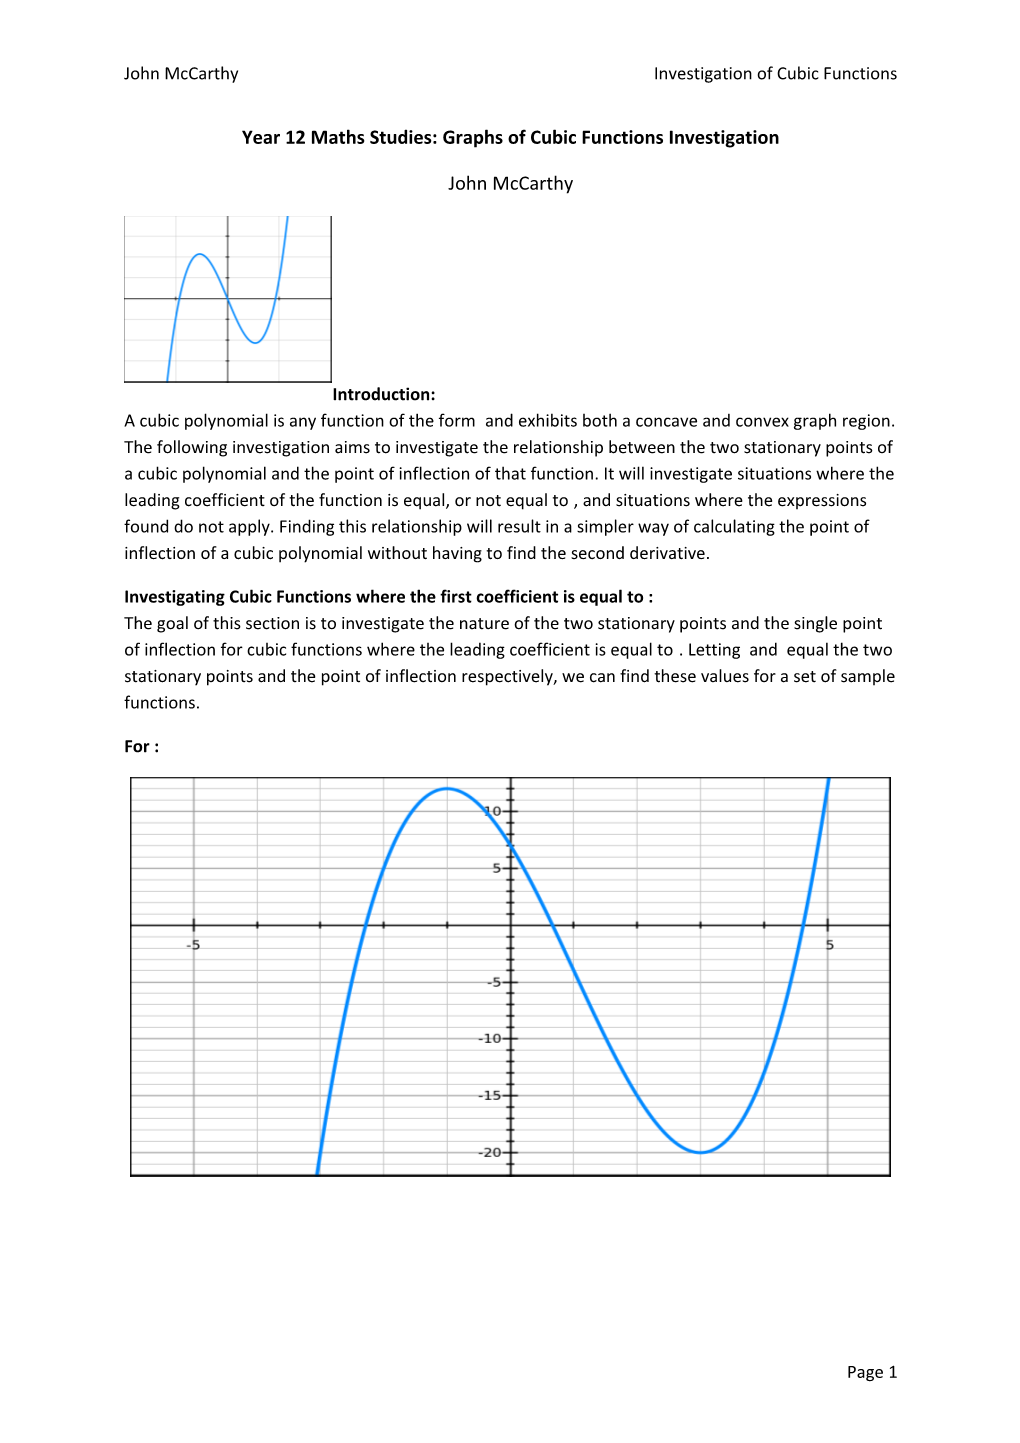 Year 12 Maths Studies: Graphs of Cubic Functions Investigation